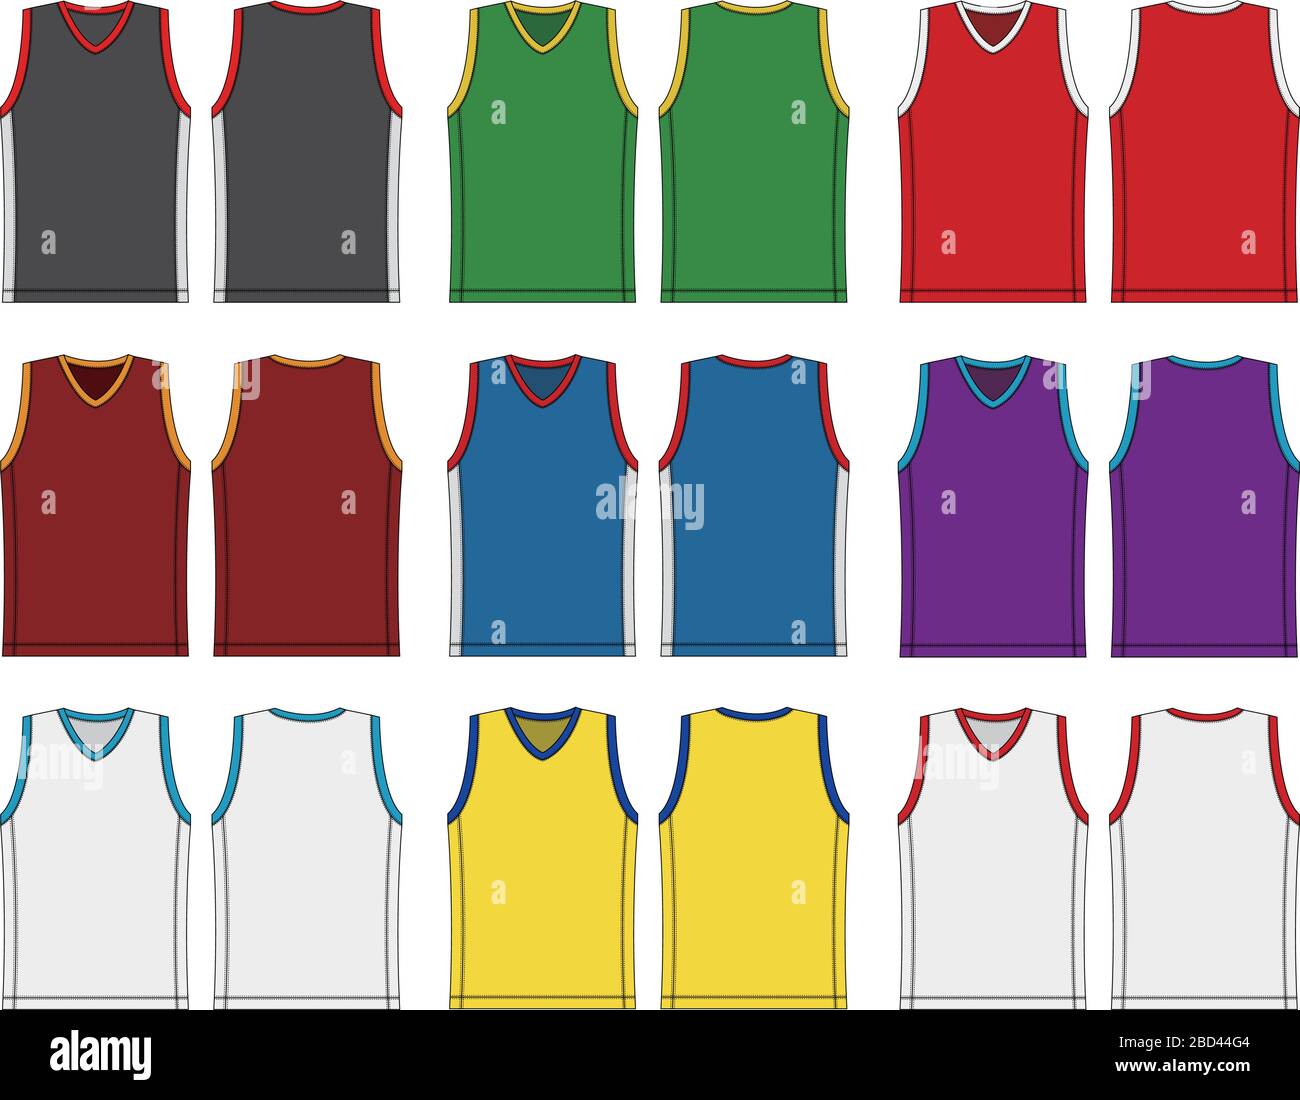 Vector Basketball Tank Top Stock Illustration - Download Image Now